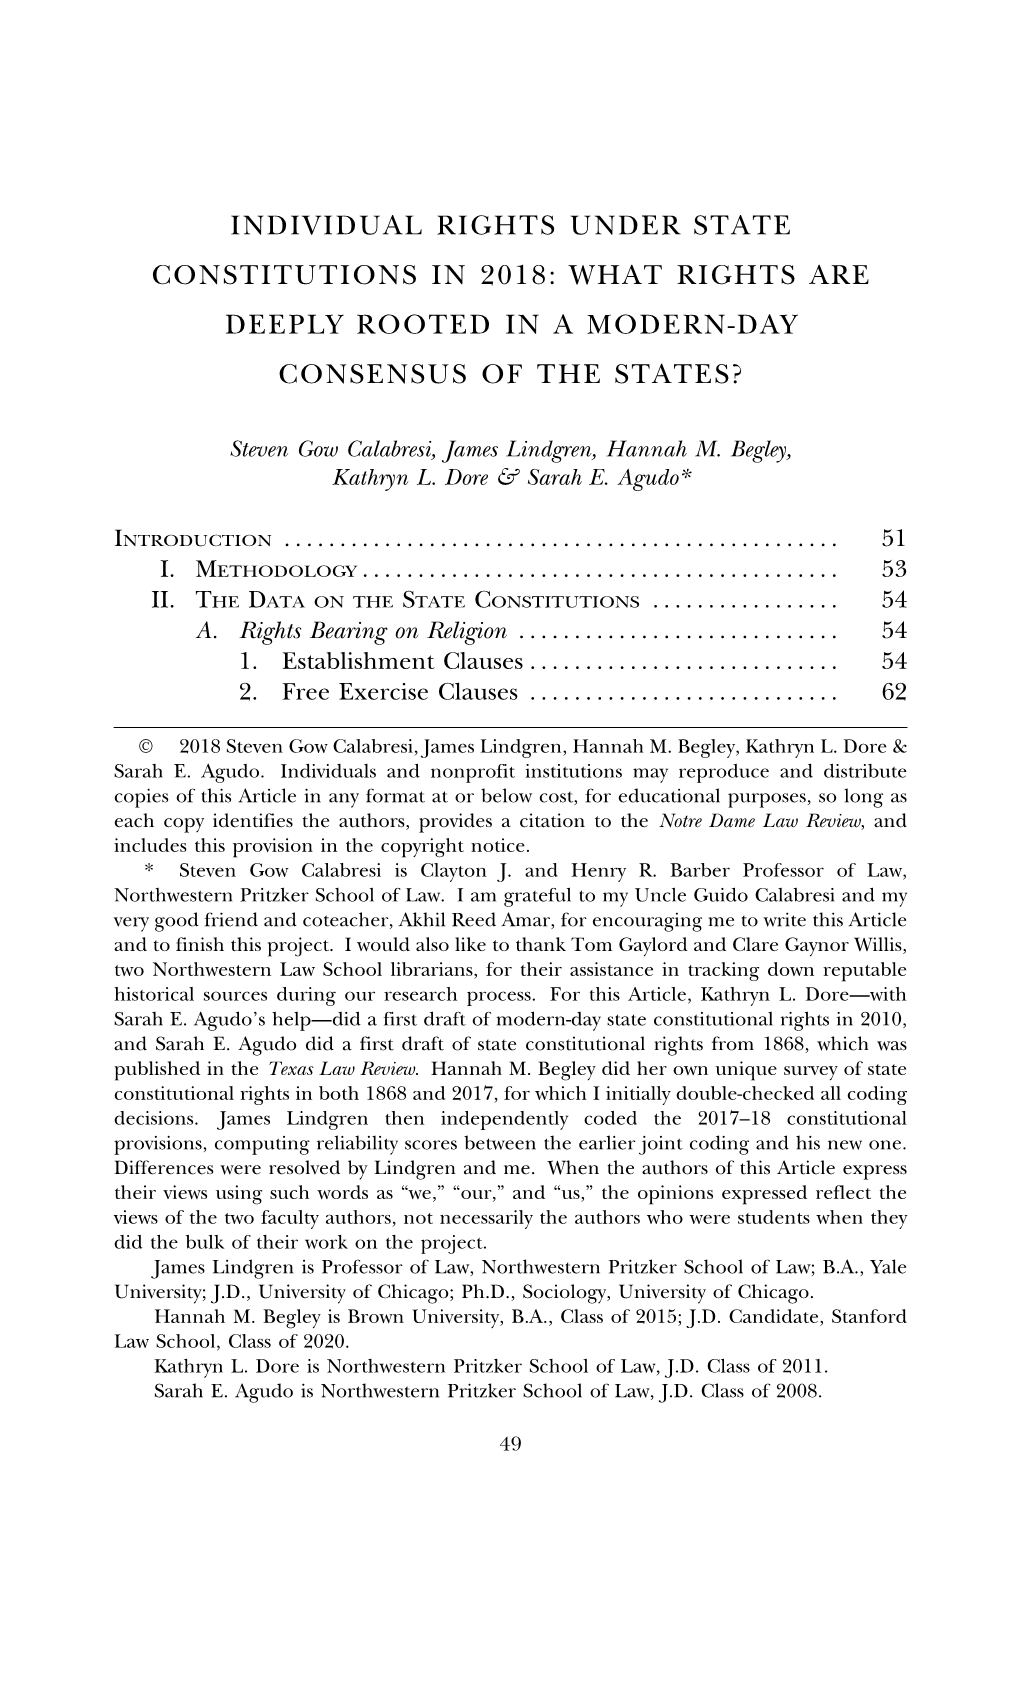 Individual Rights Under State Constitutions in 2018: What Rights Are Deeply Rooted in a Modern-Day Consensus of the States?